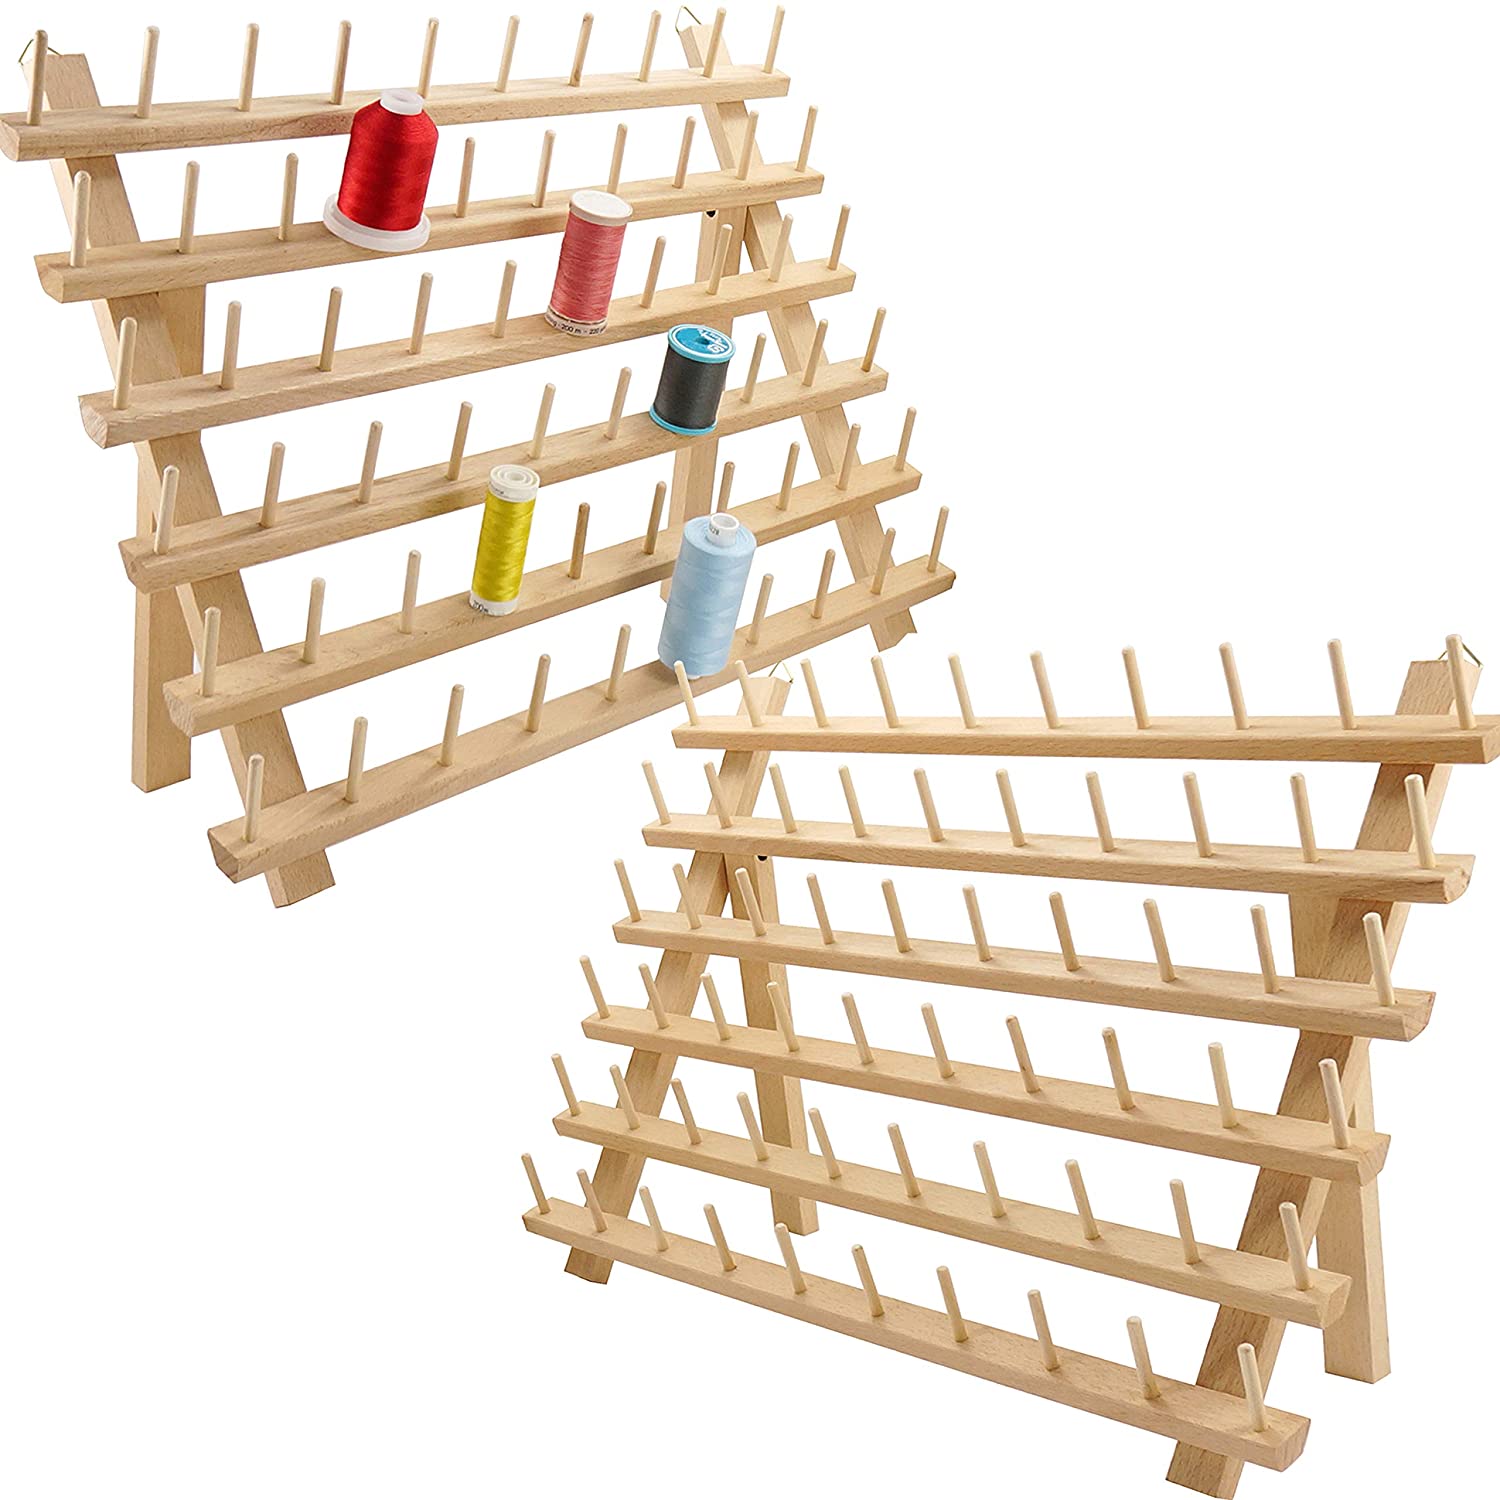 new brothread wooden thread rack isolated on white background